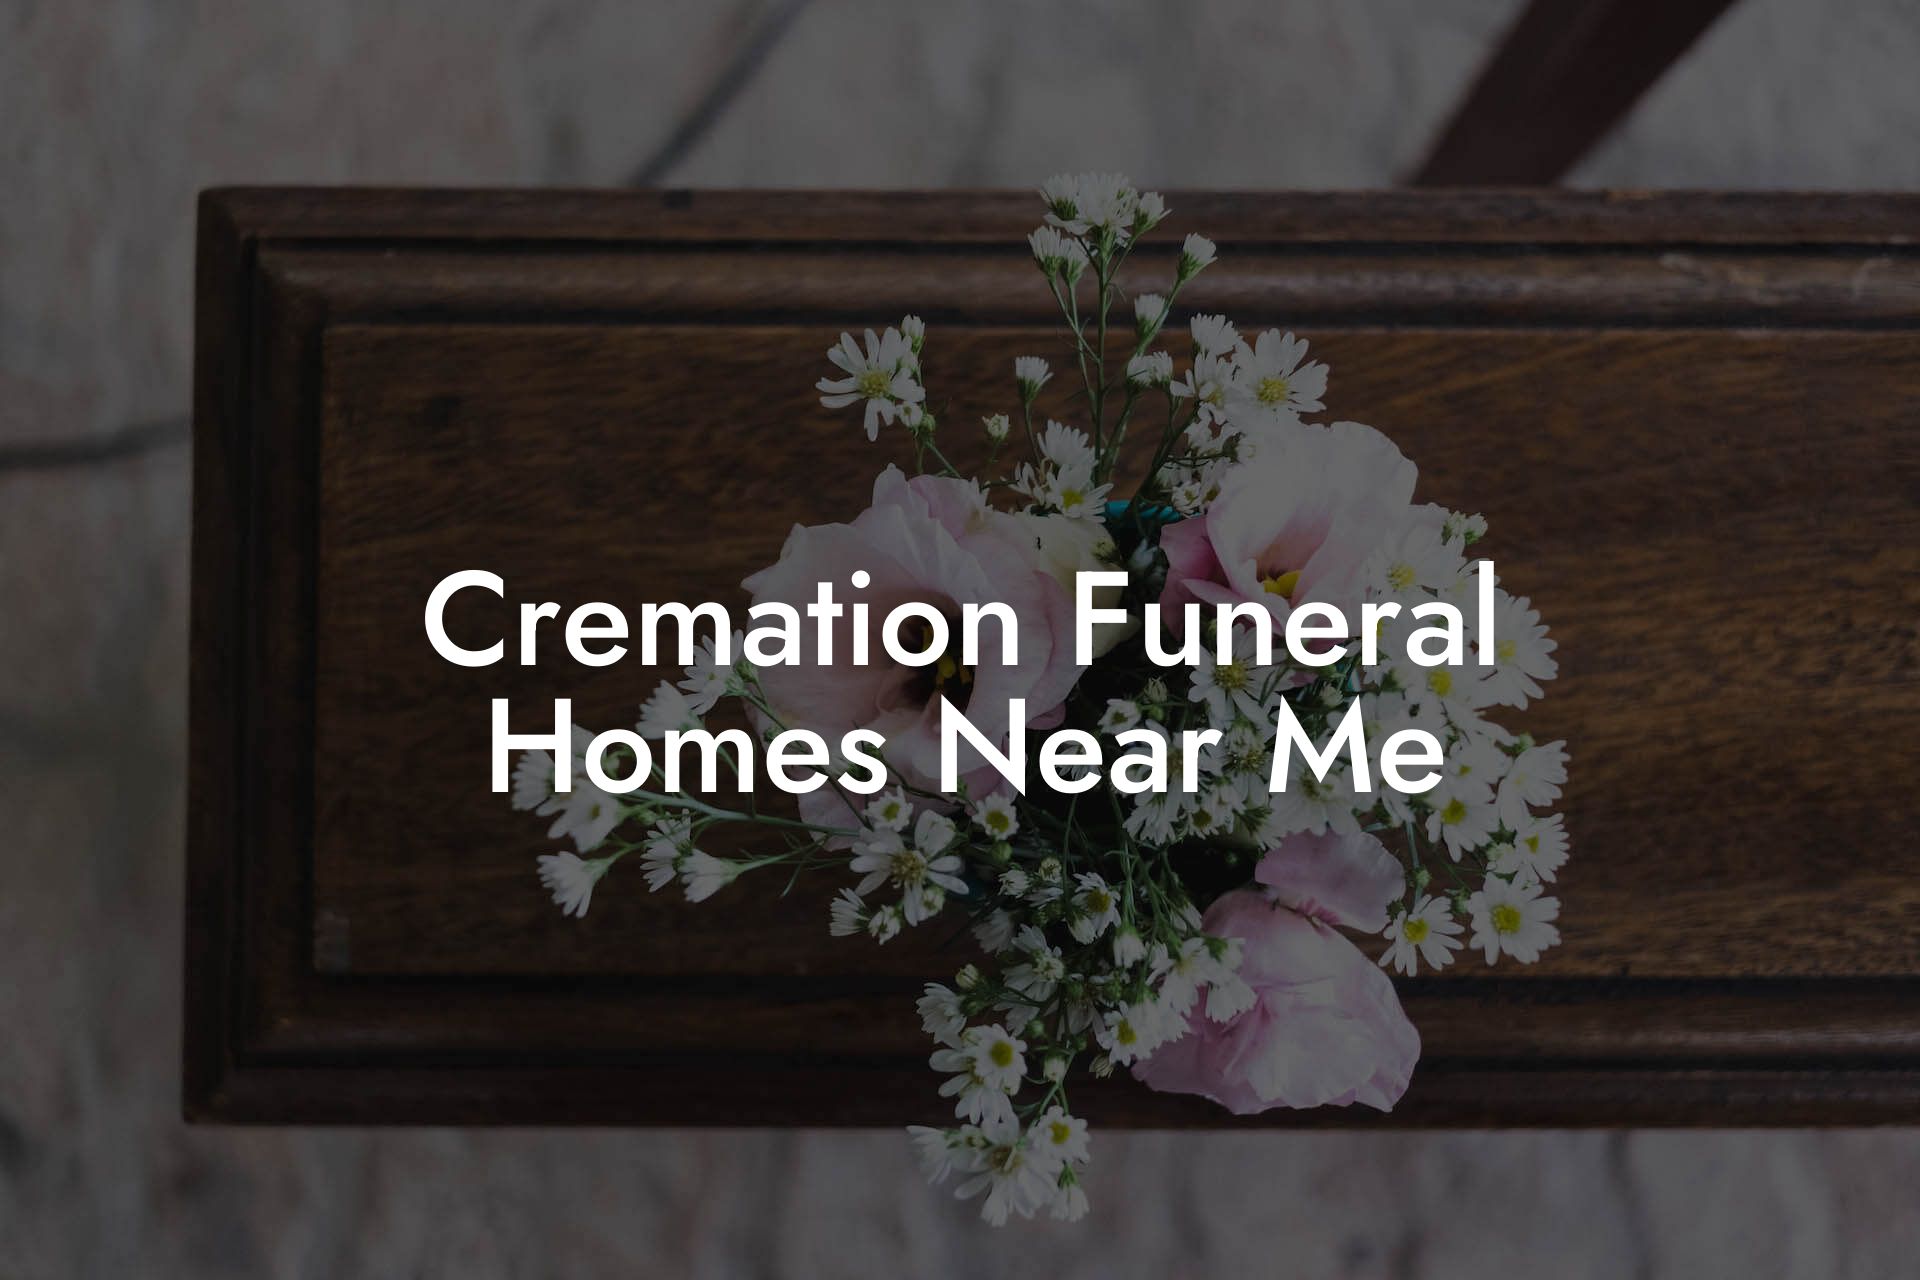 Cremation Funeral Homes Near Me